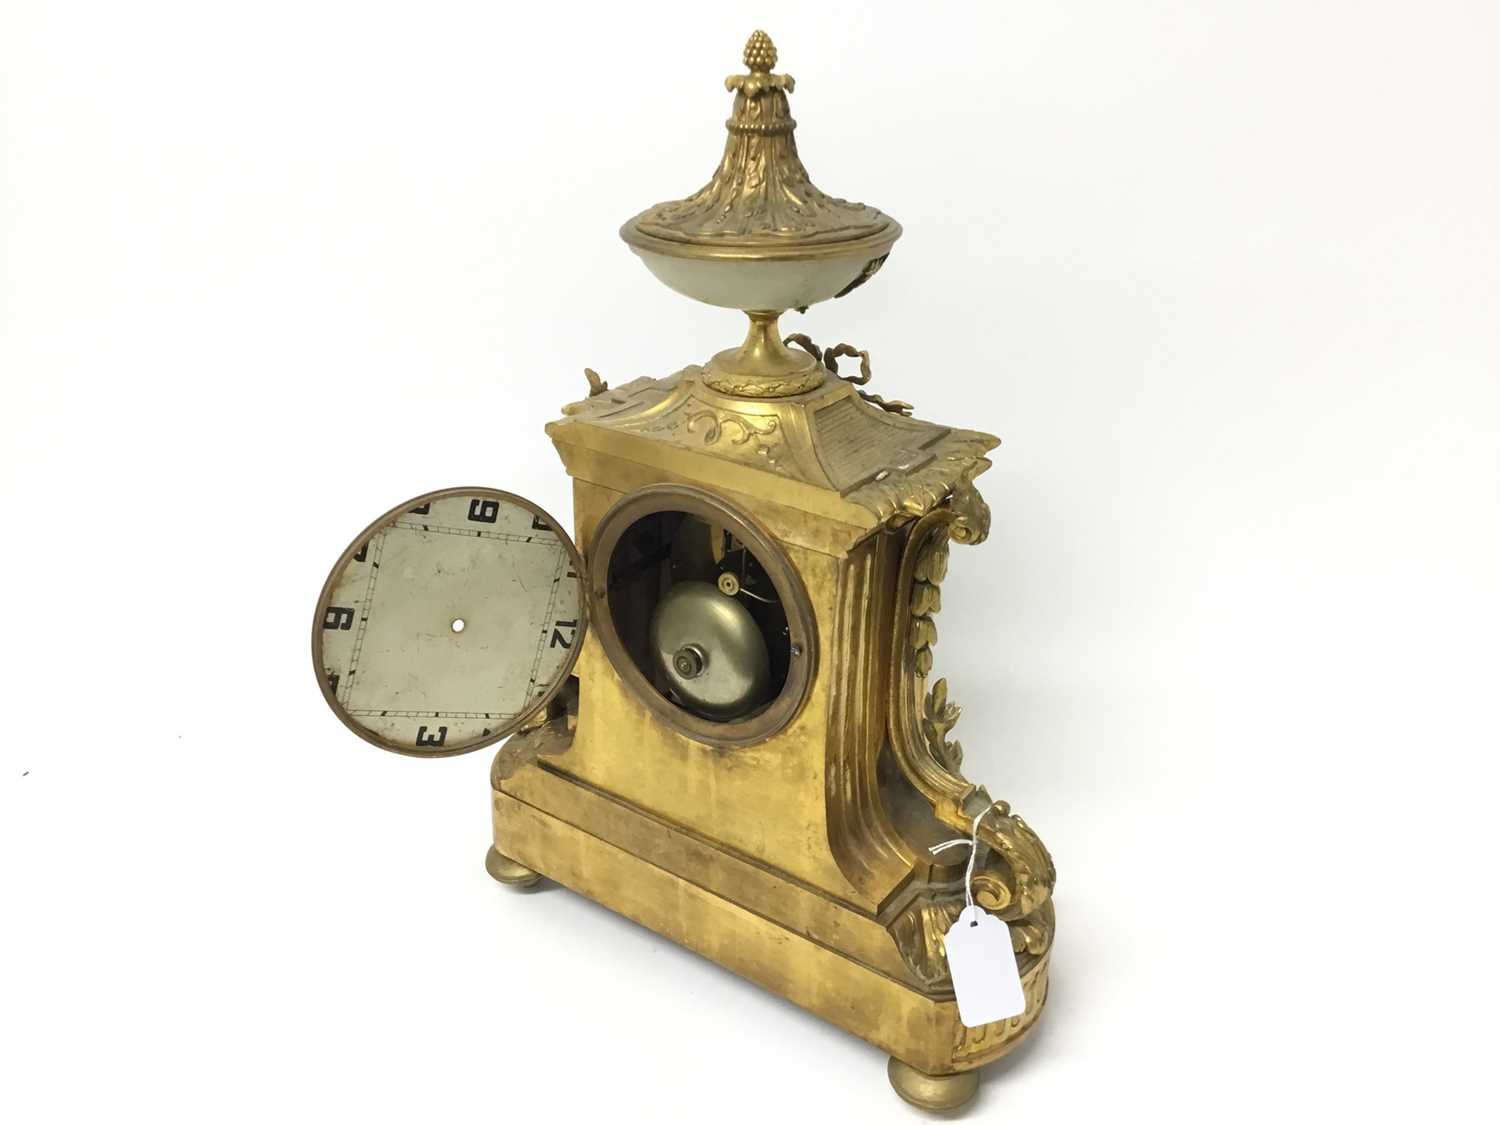 Good quality 19th century French Ormolu and White alabaster mantel clock - Image 6 of 10